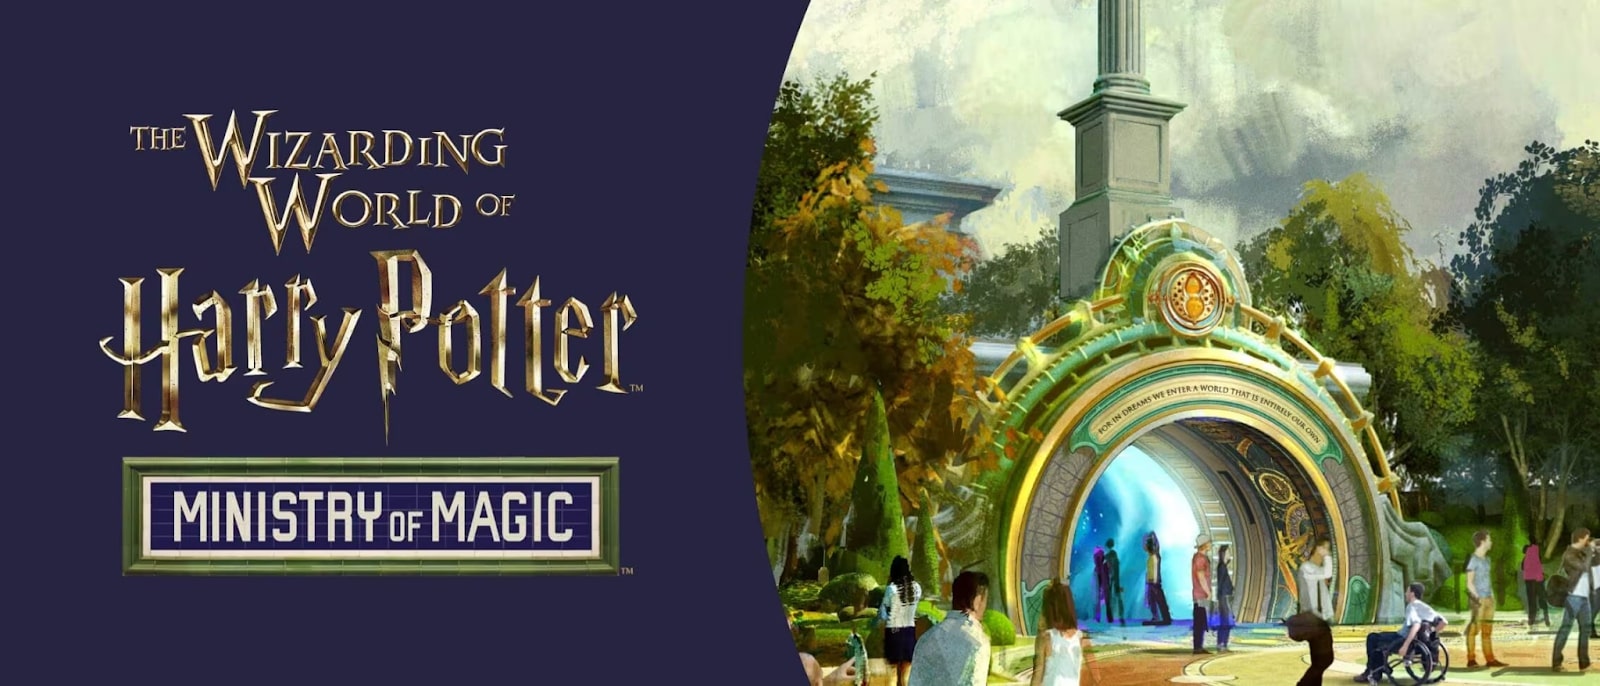 universal epic universe wizarding world of harry potter ministry of magic